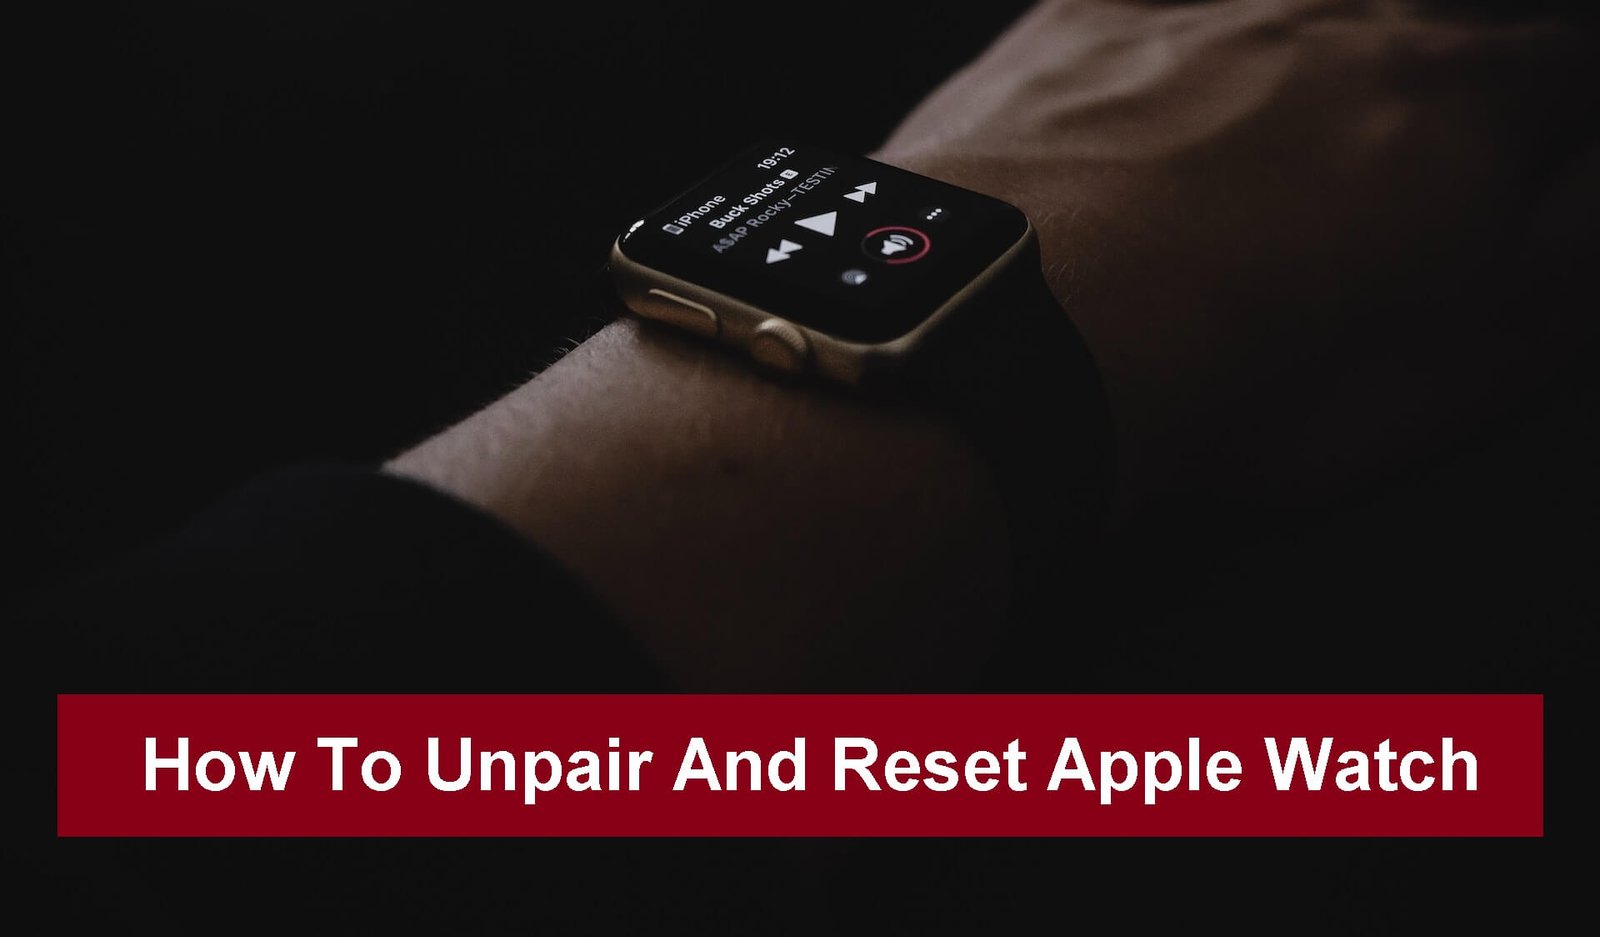 How To Unpair And Reset Apple Watch